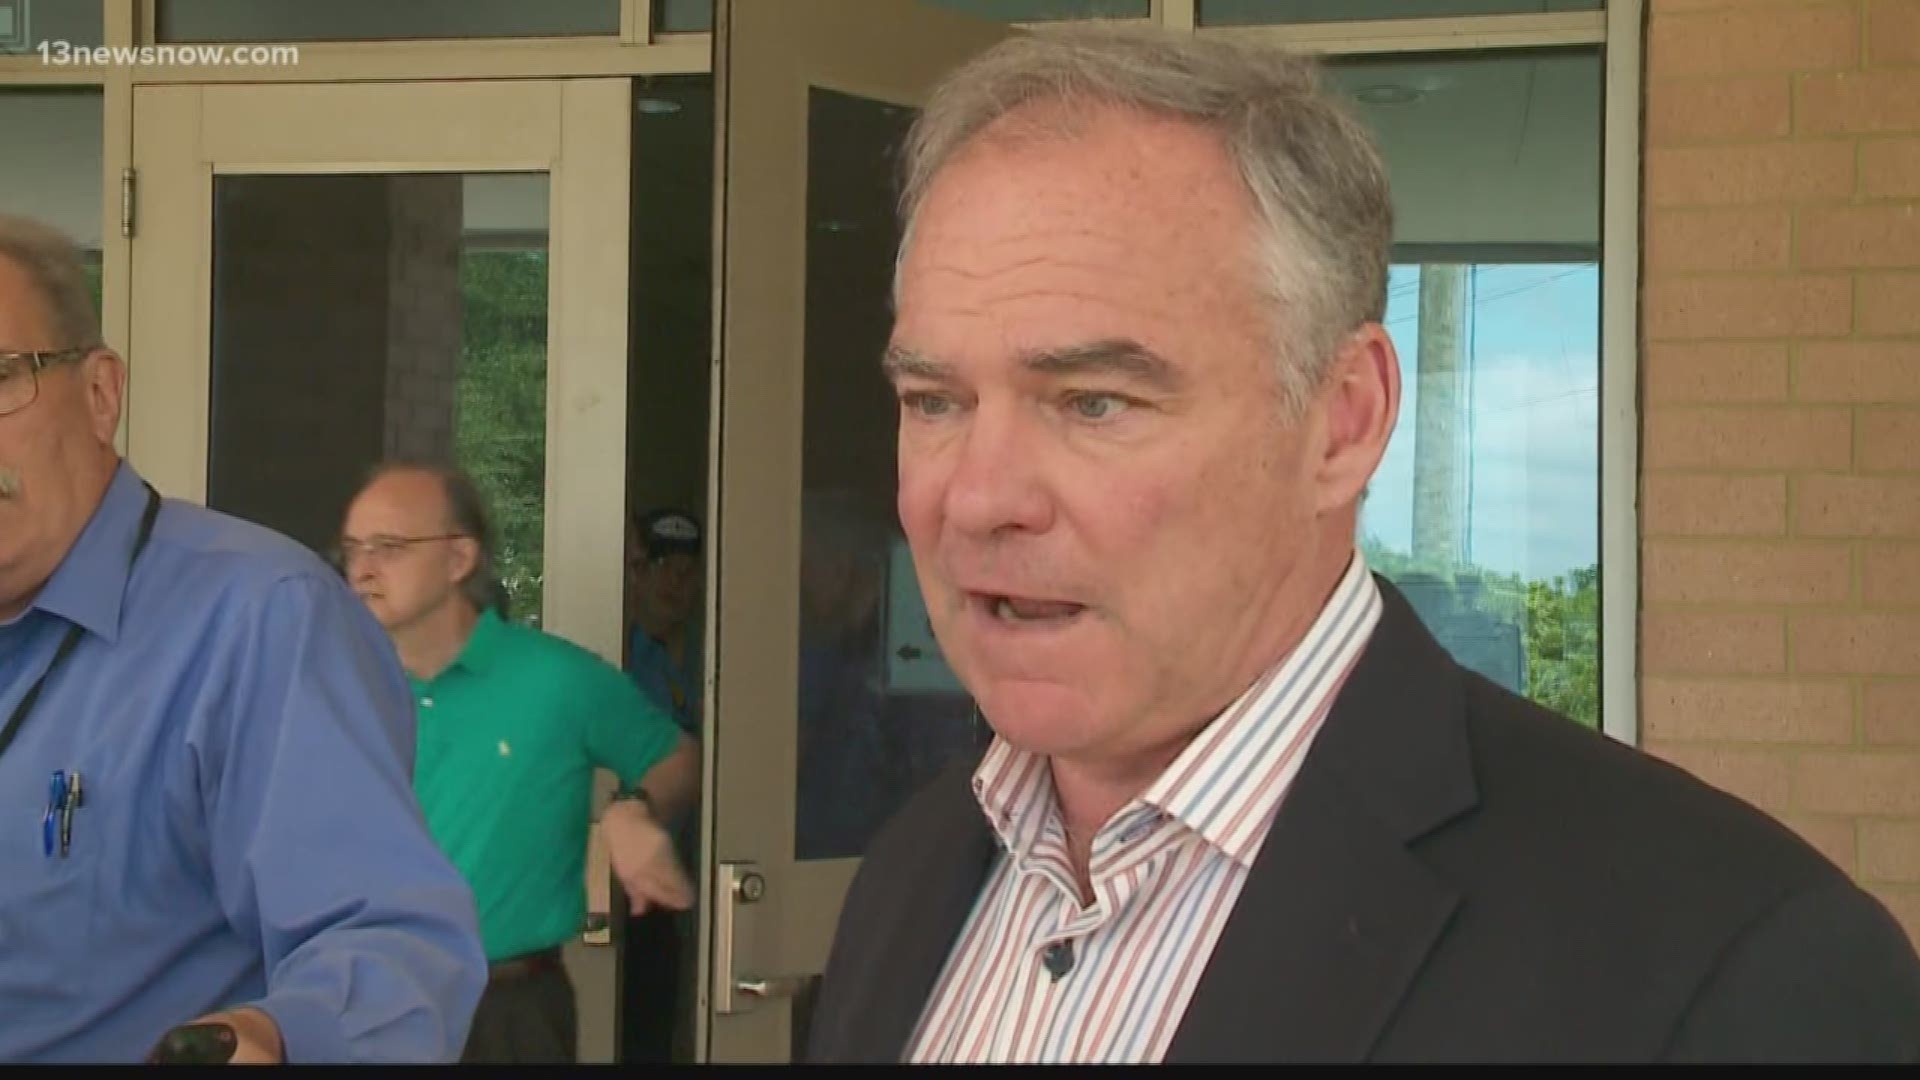 Sen. Tim Kaine said the Trump administration isn't taking the threat of election hacking seriously given allegations of Russian hacking in the 2016 presidential elections.